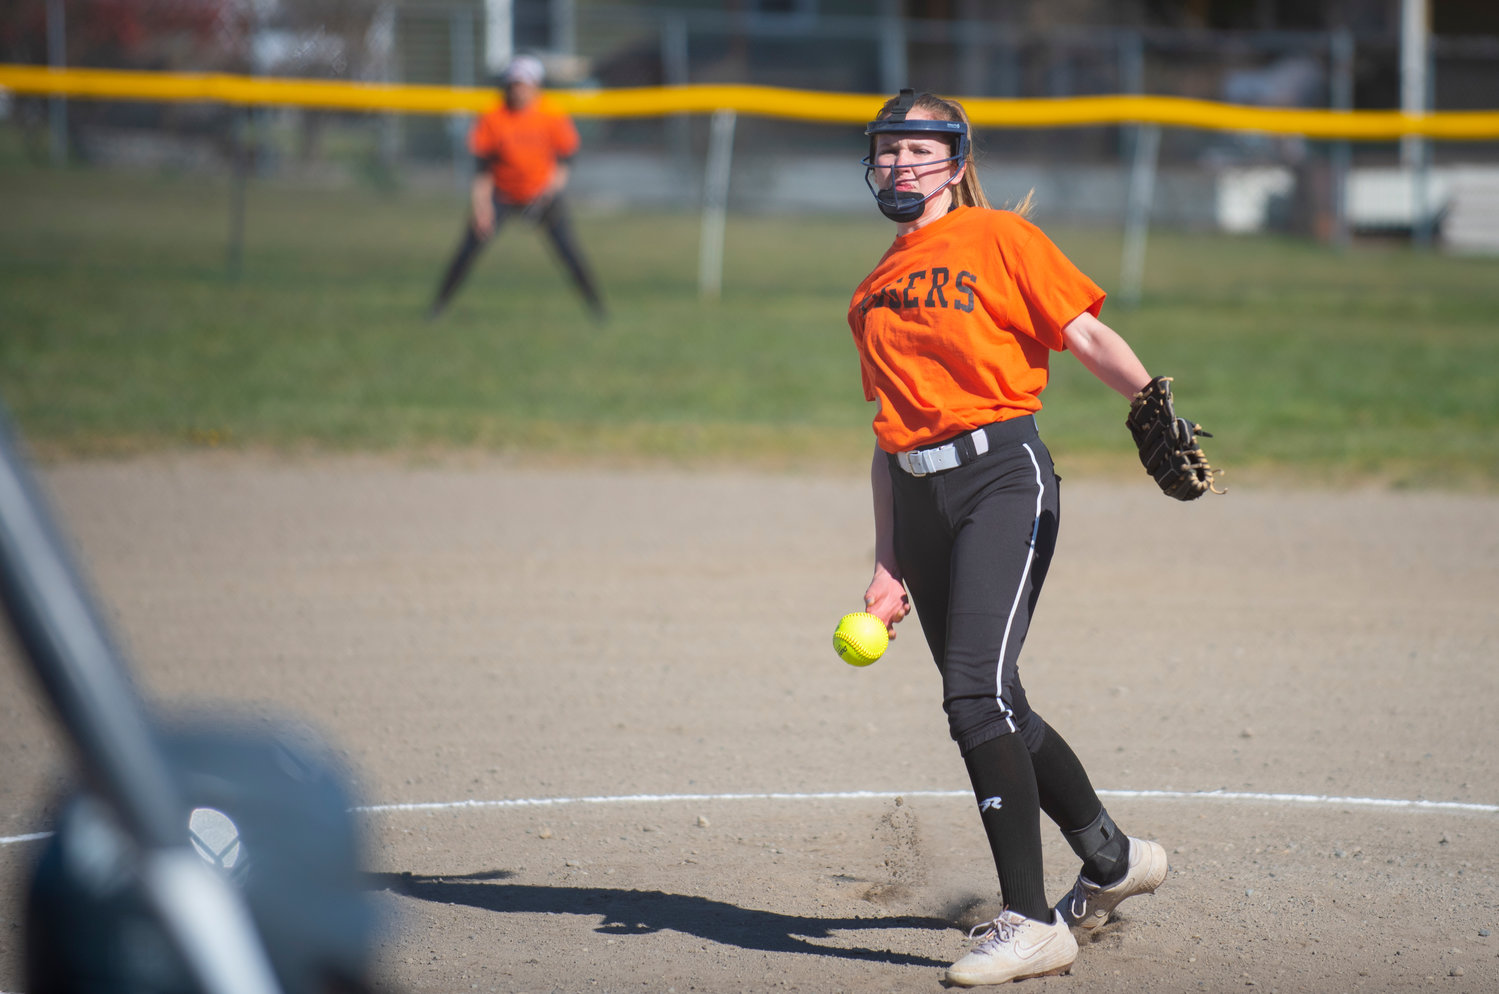 Napavine ace Cailyn Milton releases a pitch to a Rainier batter on Wednesday.